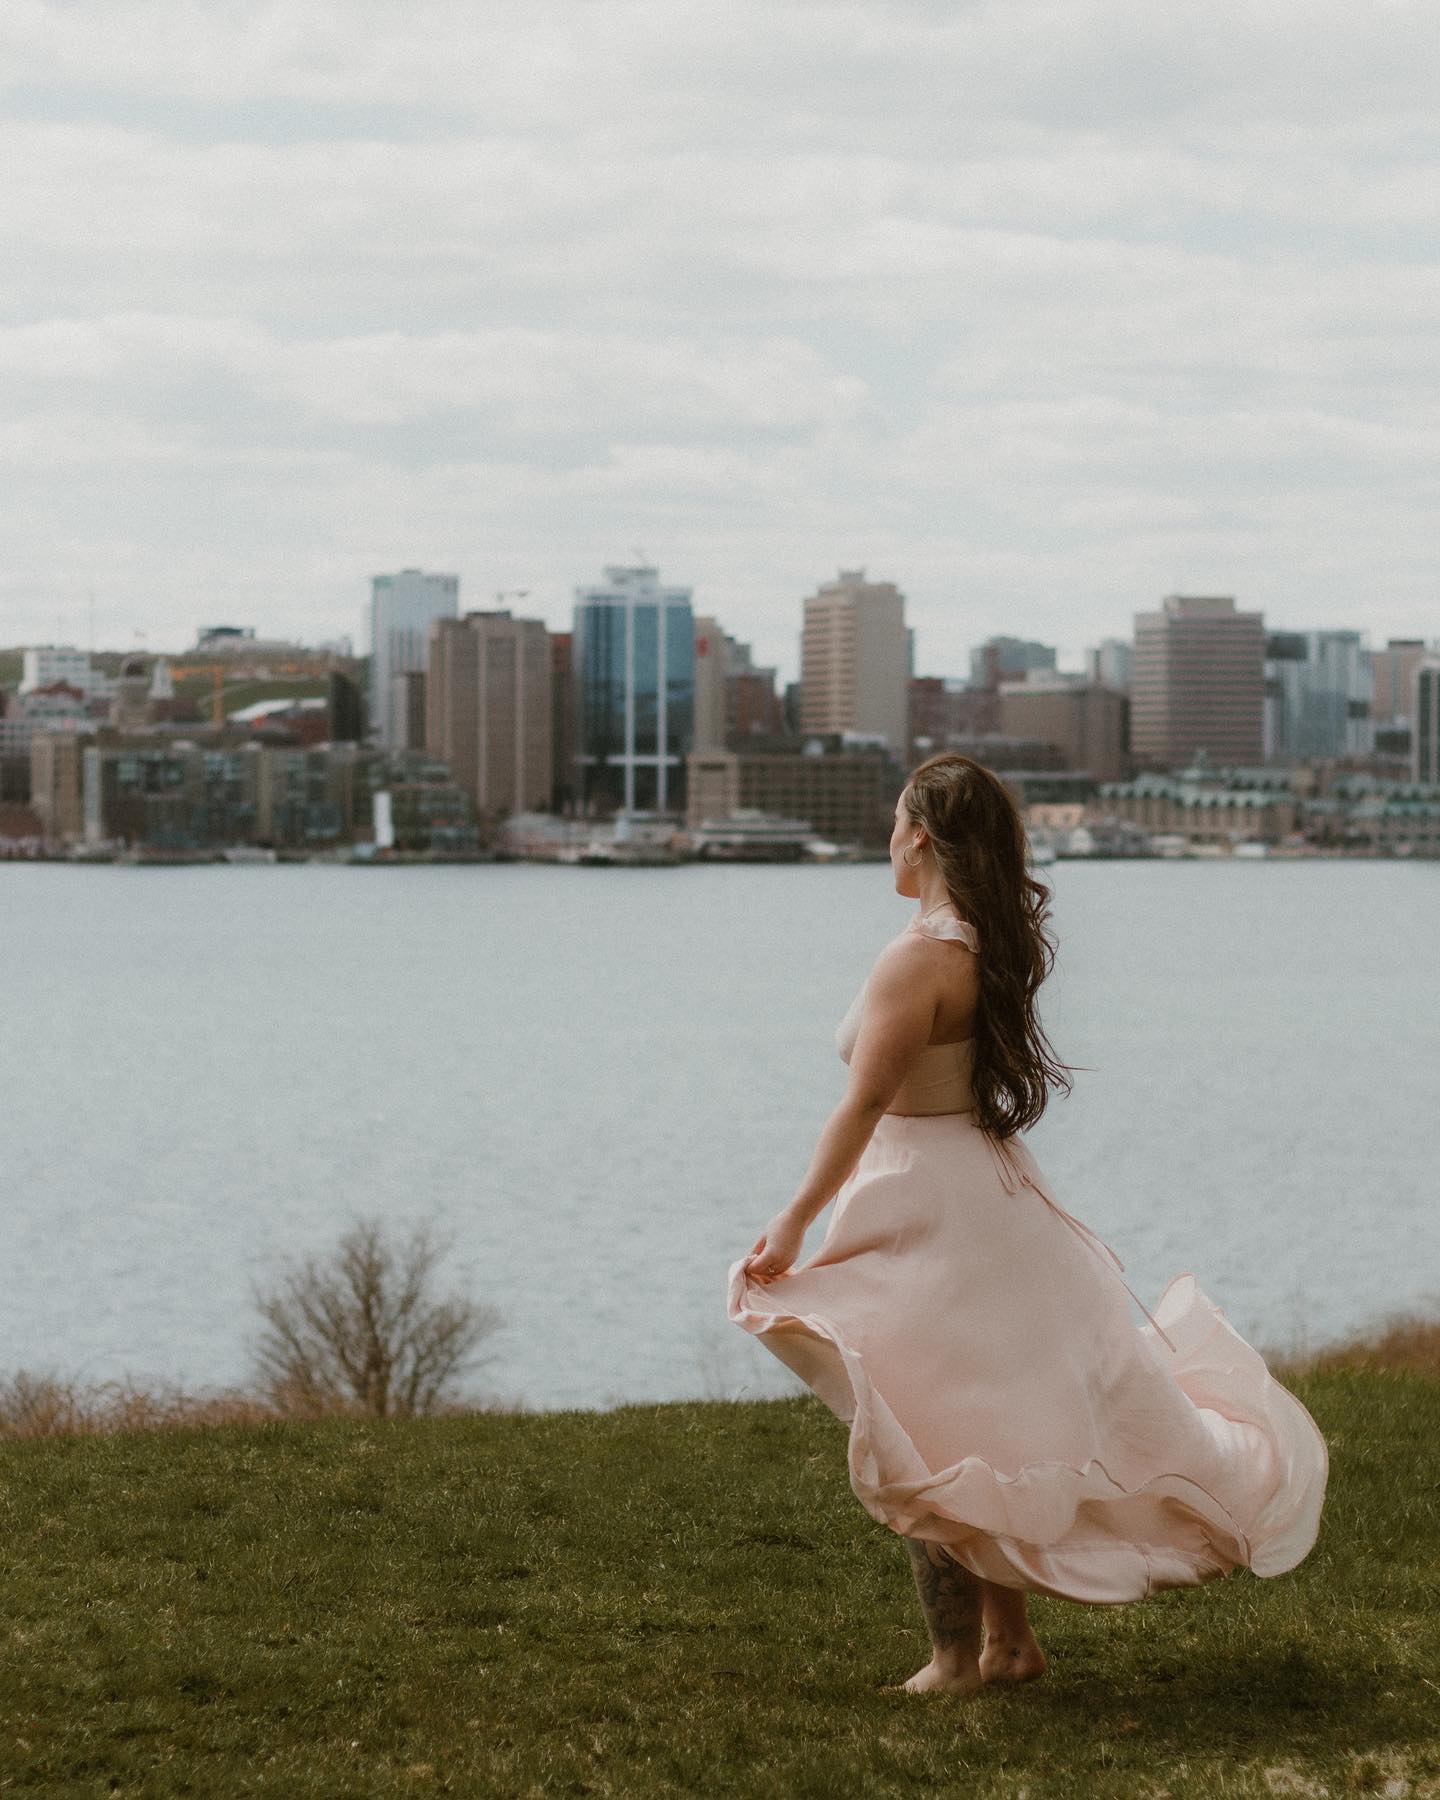 Thrifted this dress and immediately texted Cass to set up a shoot and boy oh boy we had so much fun with it 🌸✨

We location hopped a lot for this shoot but ended up on the Dartmouth side overlooking the beautiful city line of Halifax

The sun was shining, it was nice and warm and we soaked up every second of it 🥰